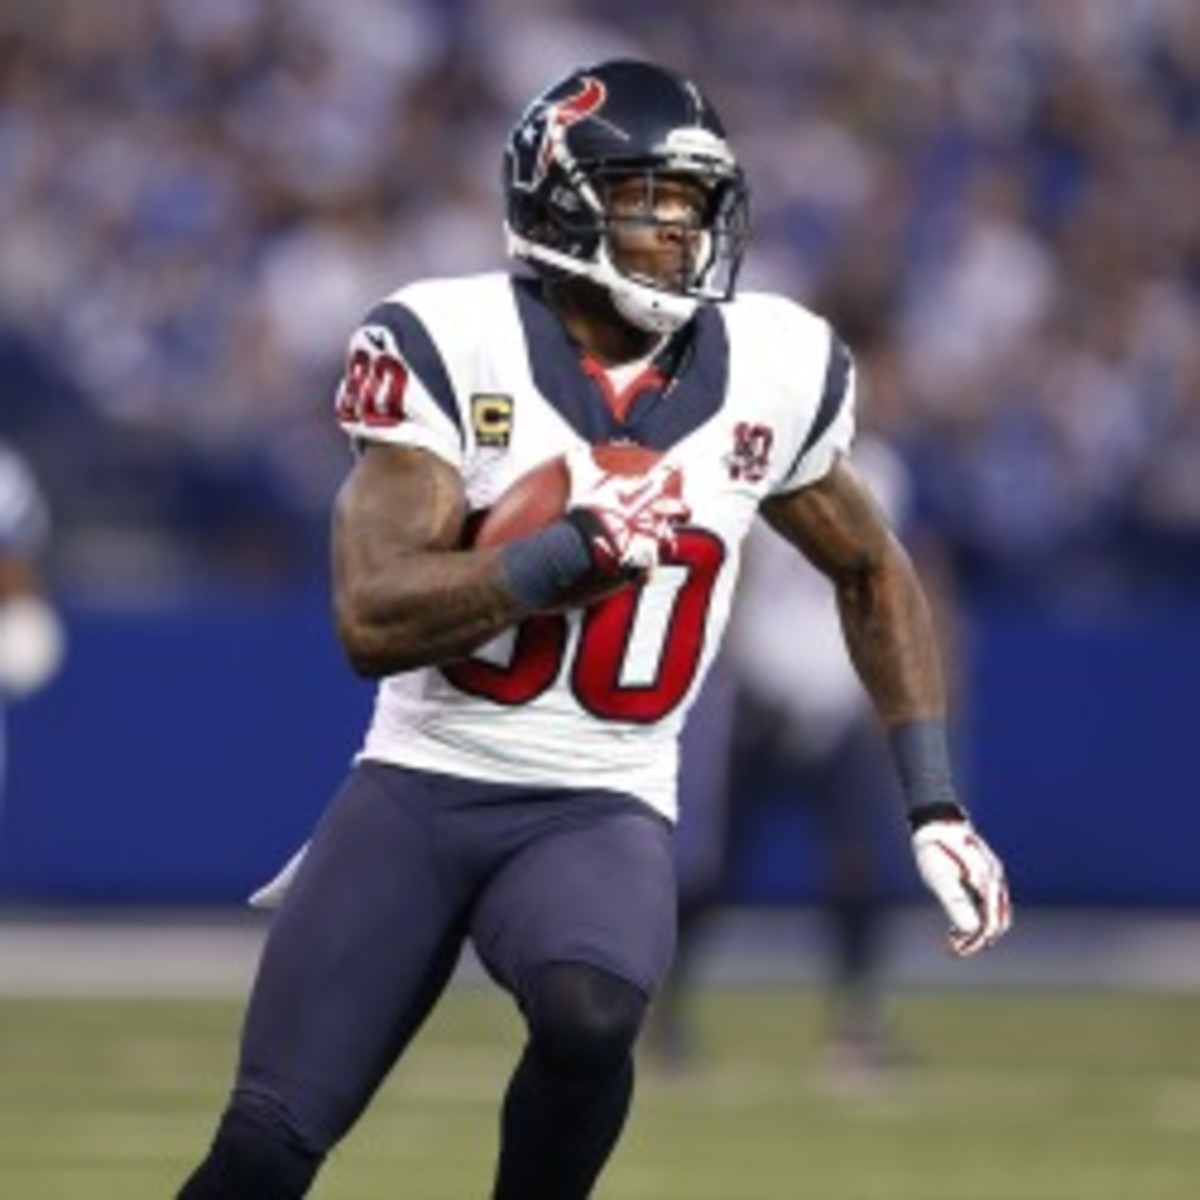 The Texans need help at receiver and Andre Johnson hopes the team drafts one next week. (Joe Robbins/Getty Images)